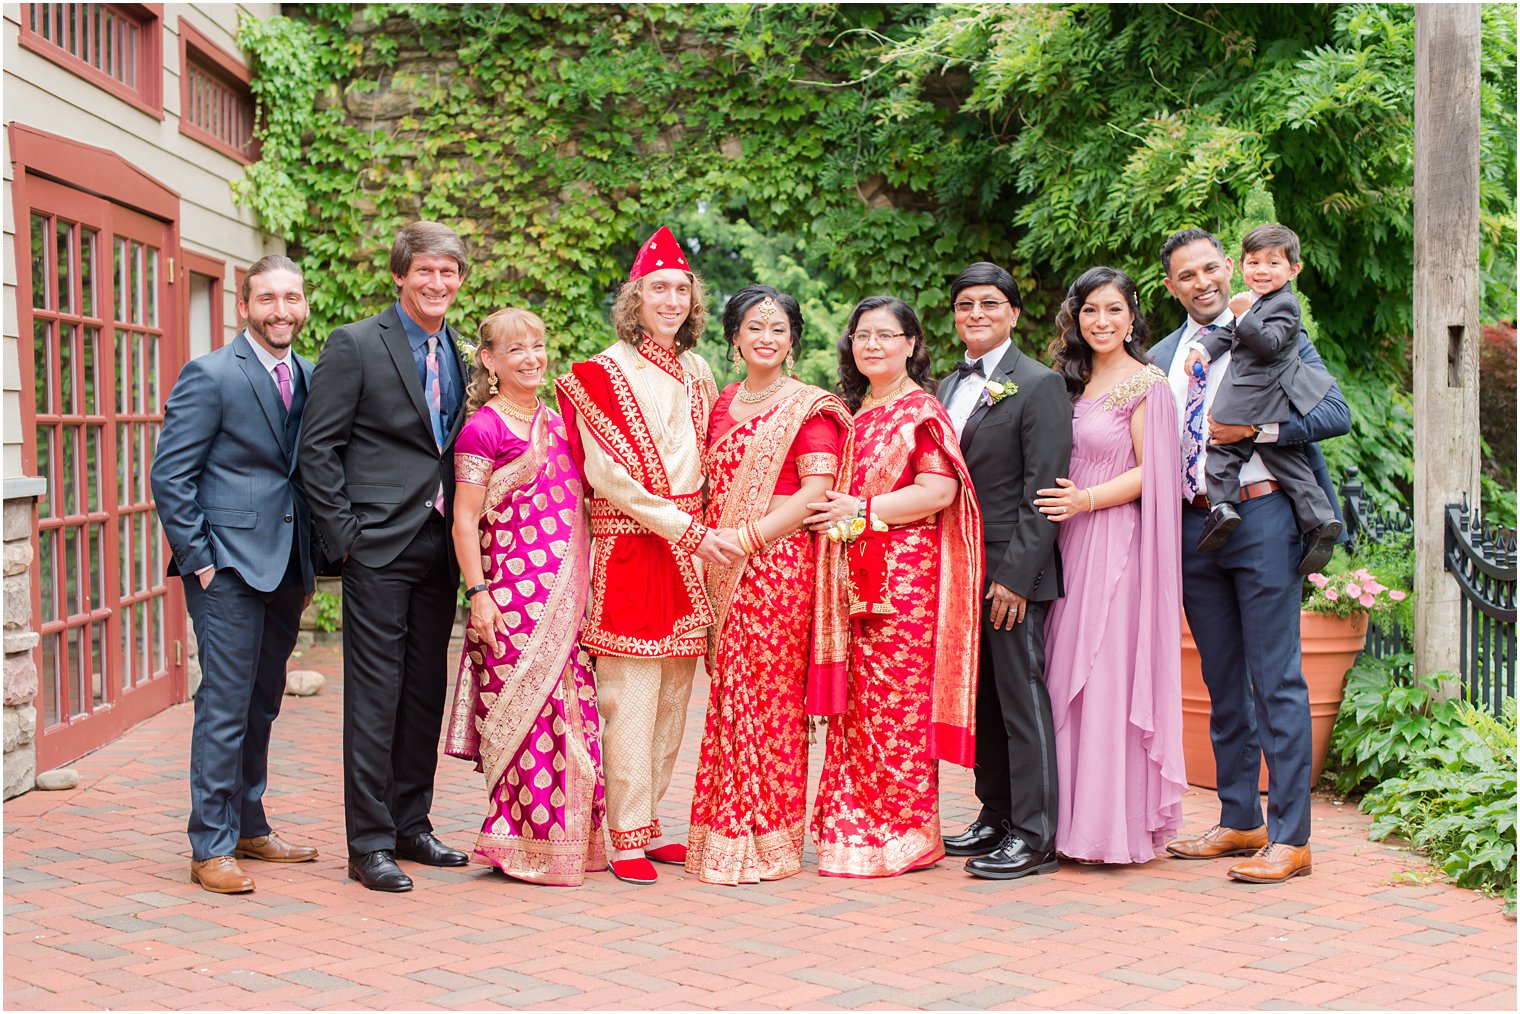 family portrait after traditional Indian wedding at the Ashford Estate